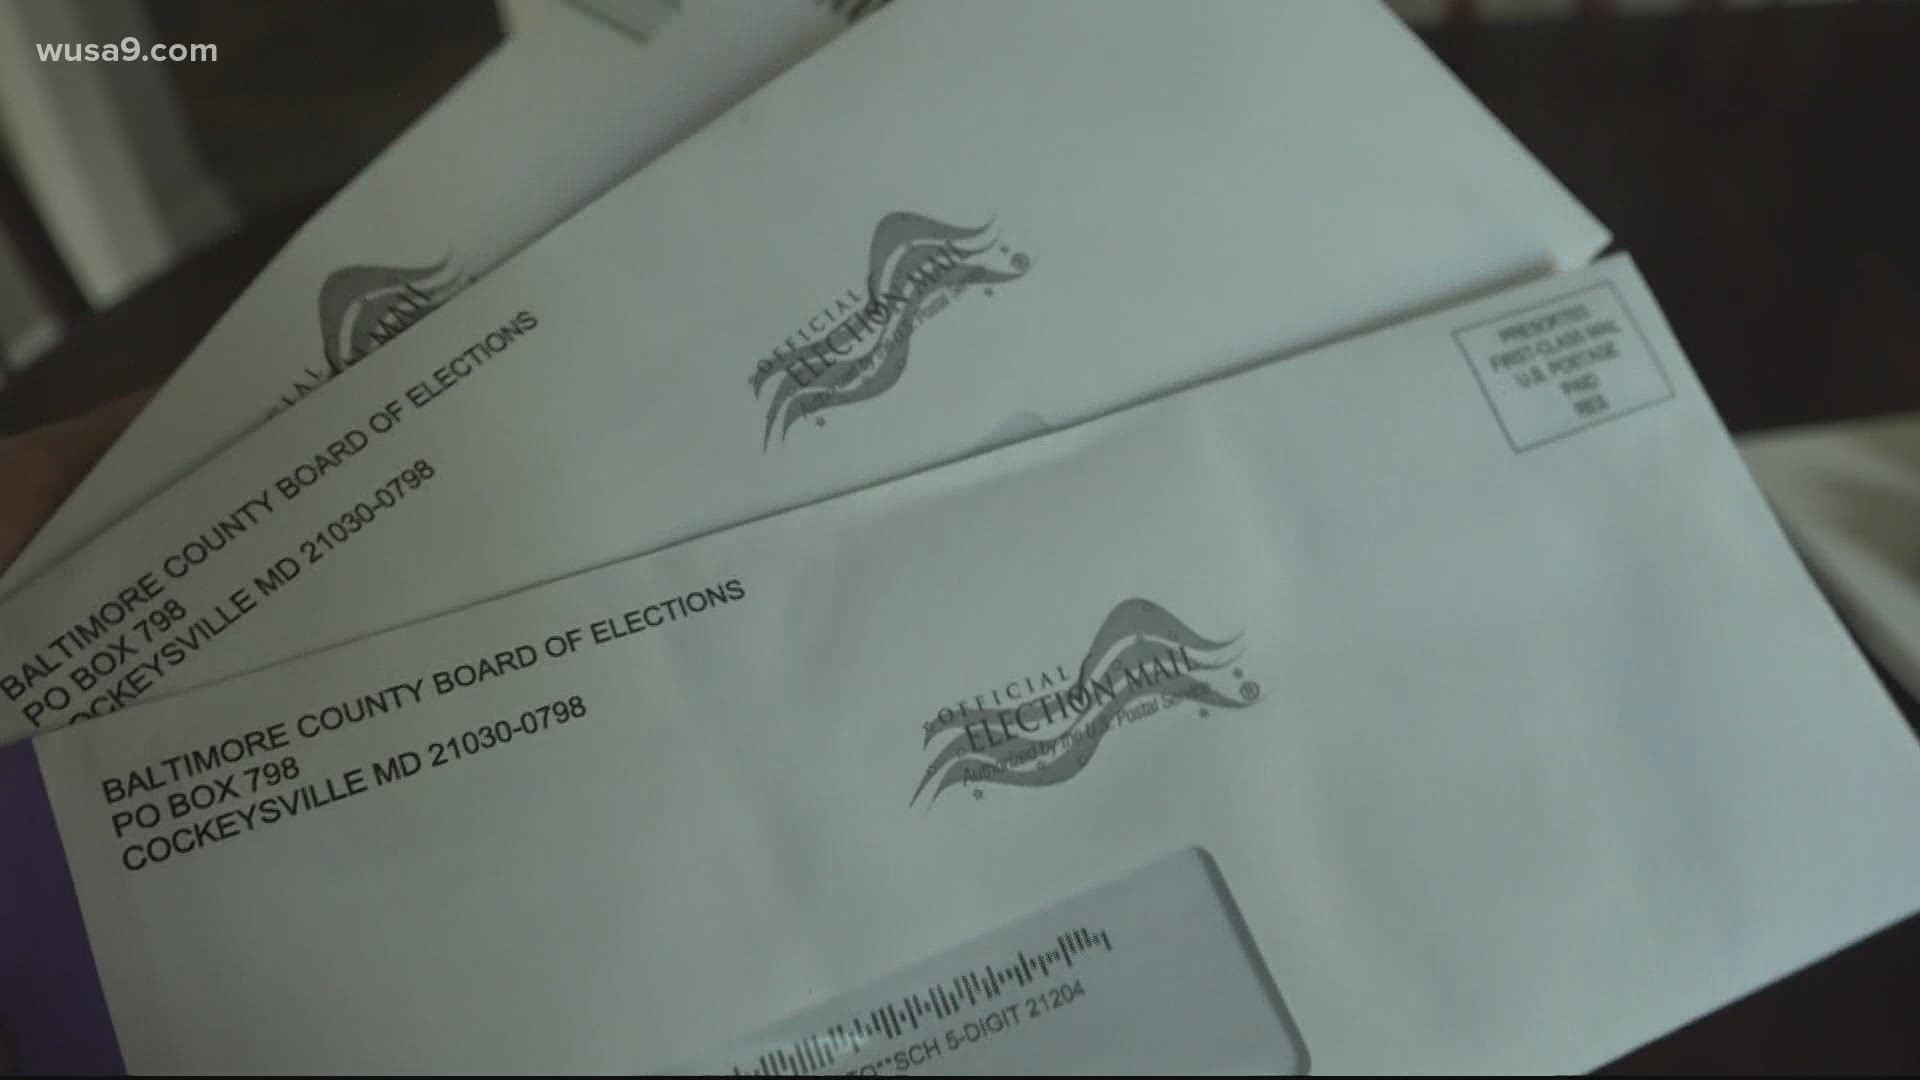 Most voters have received those applications in their mailboxes in past few days.